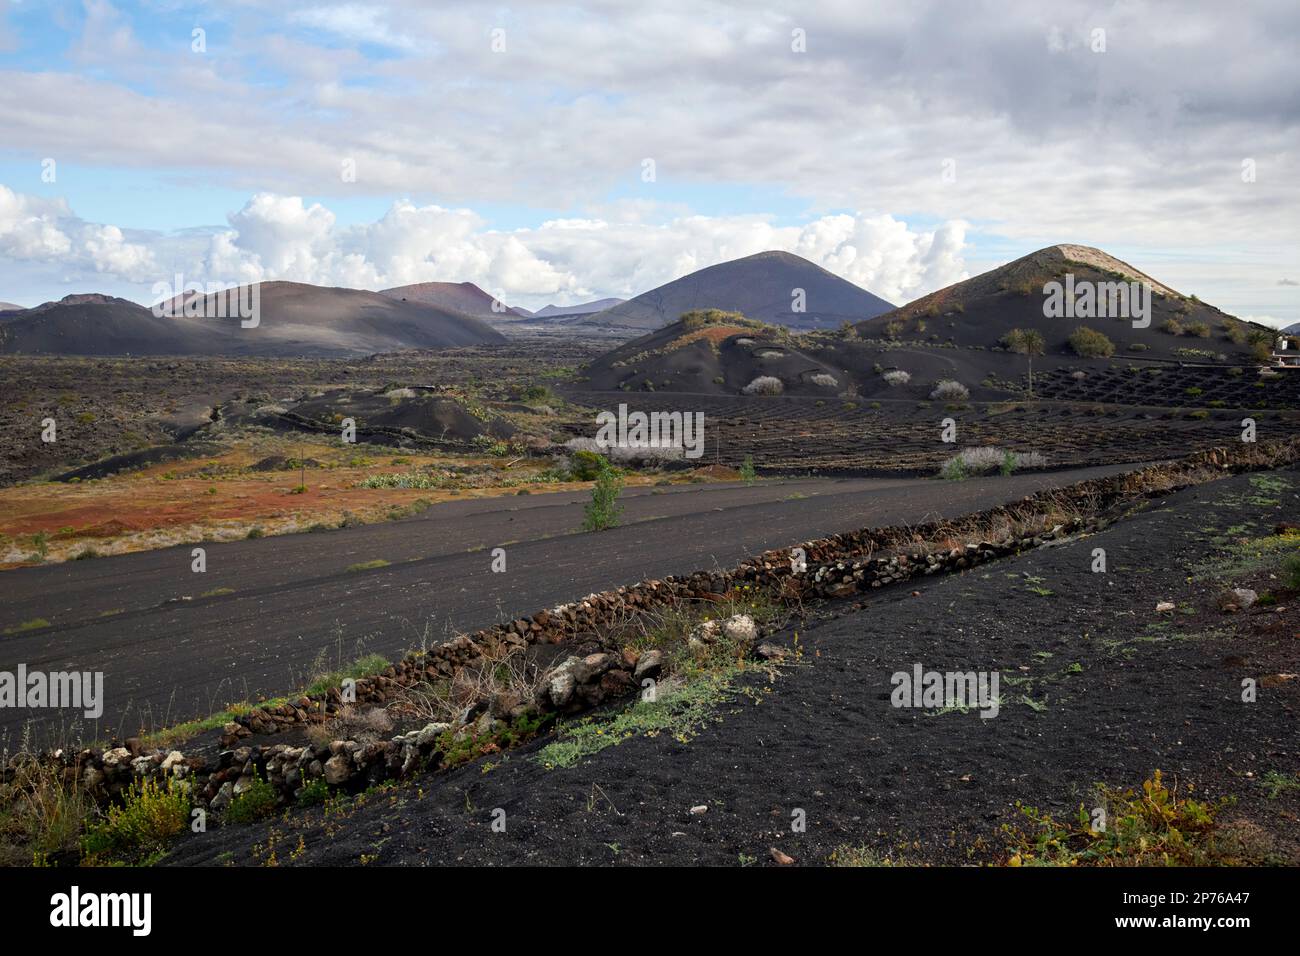 la geria winemaking region landscape with volcanoes in the background Lanzarote, Canary Islands, Spain Stock Photo